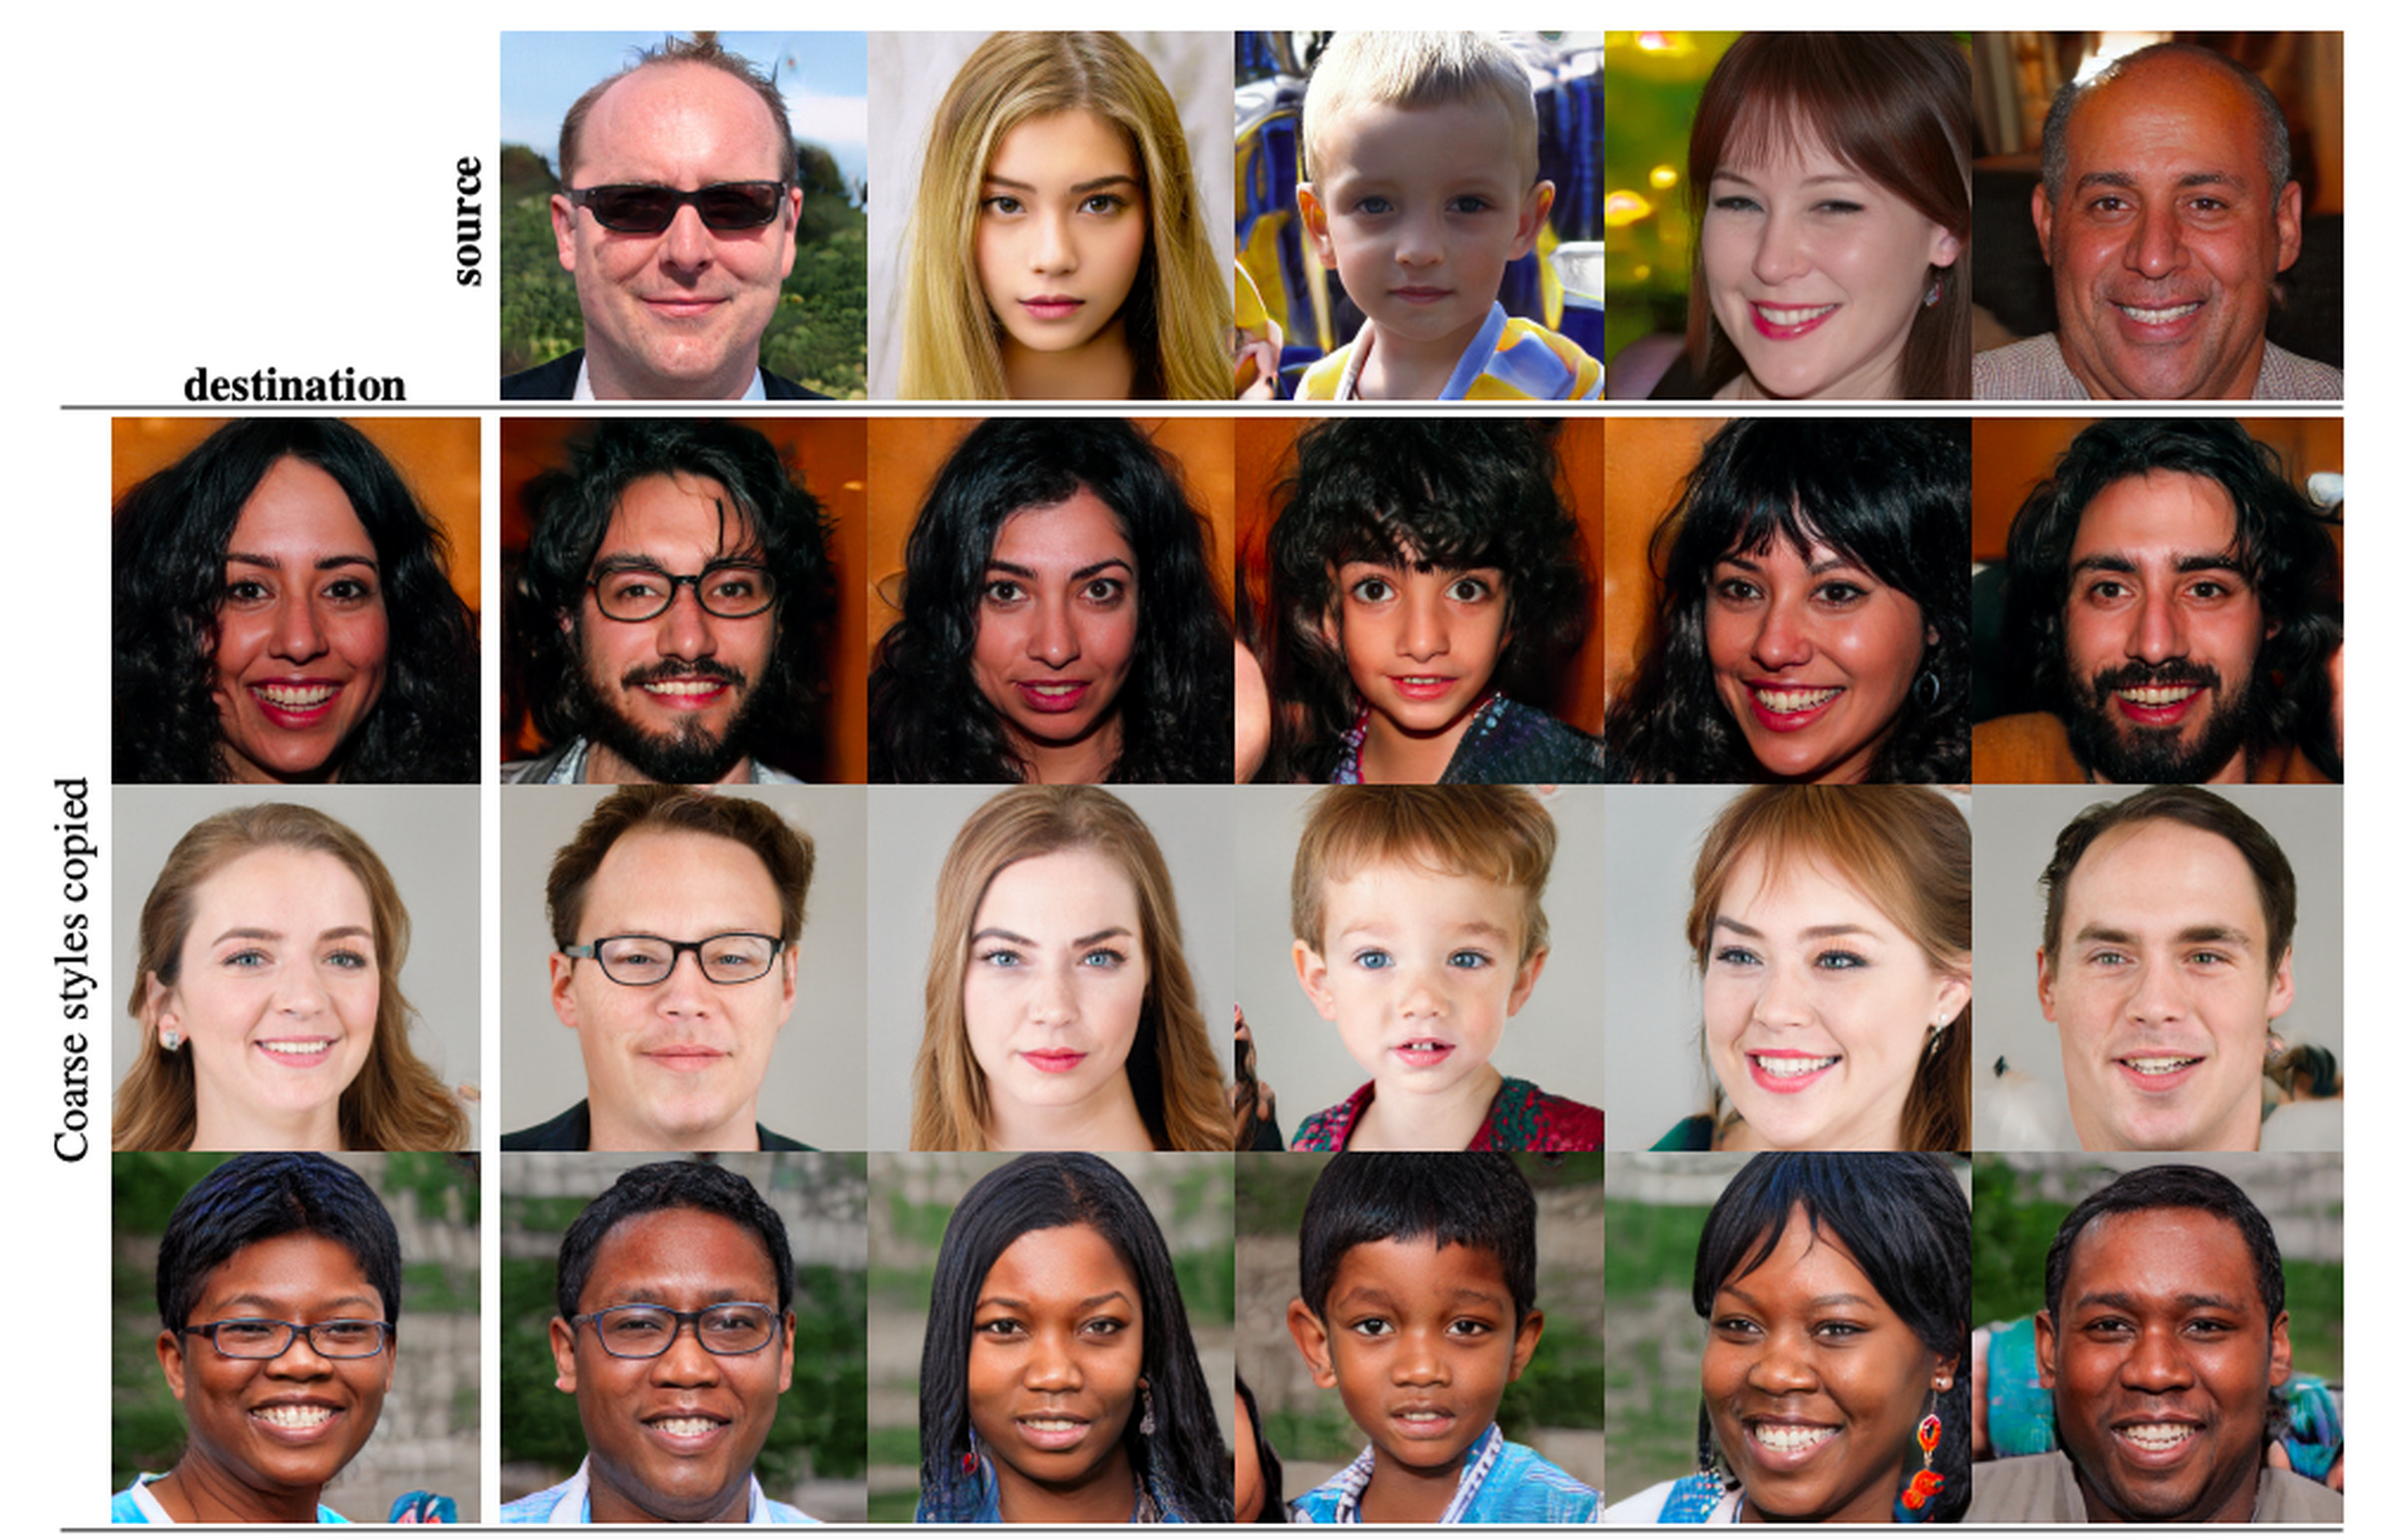 Style transfer allows you to blend facial characteristics from different people. 